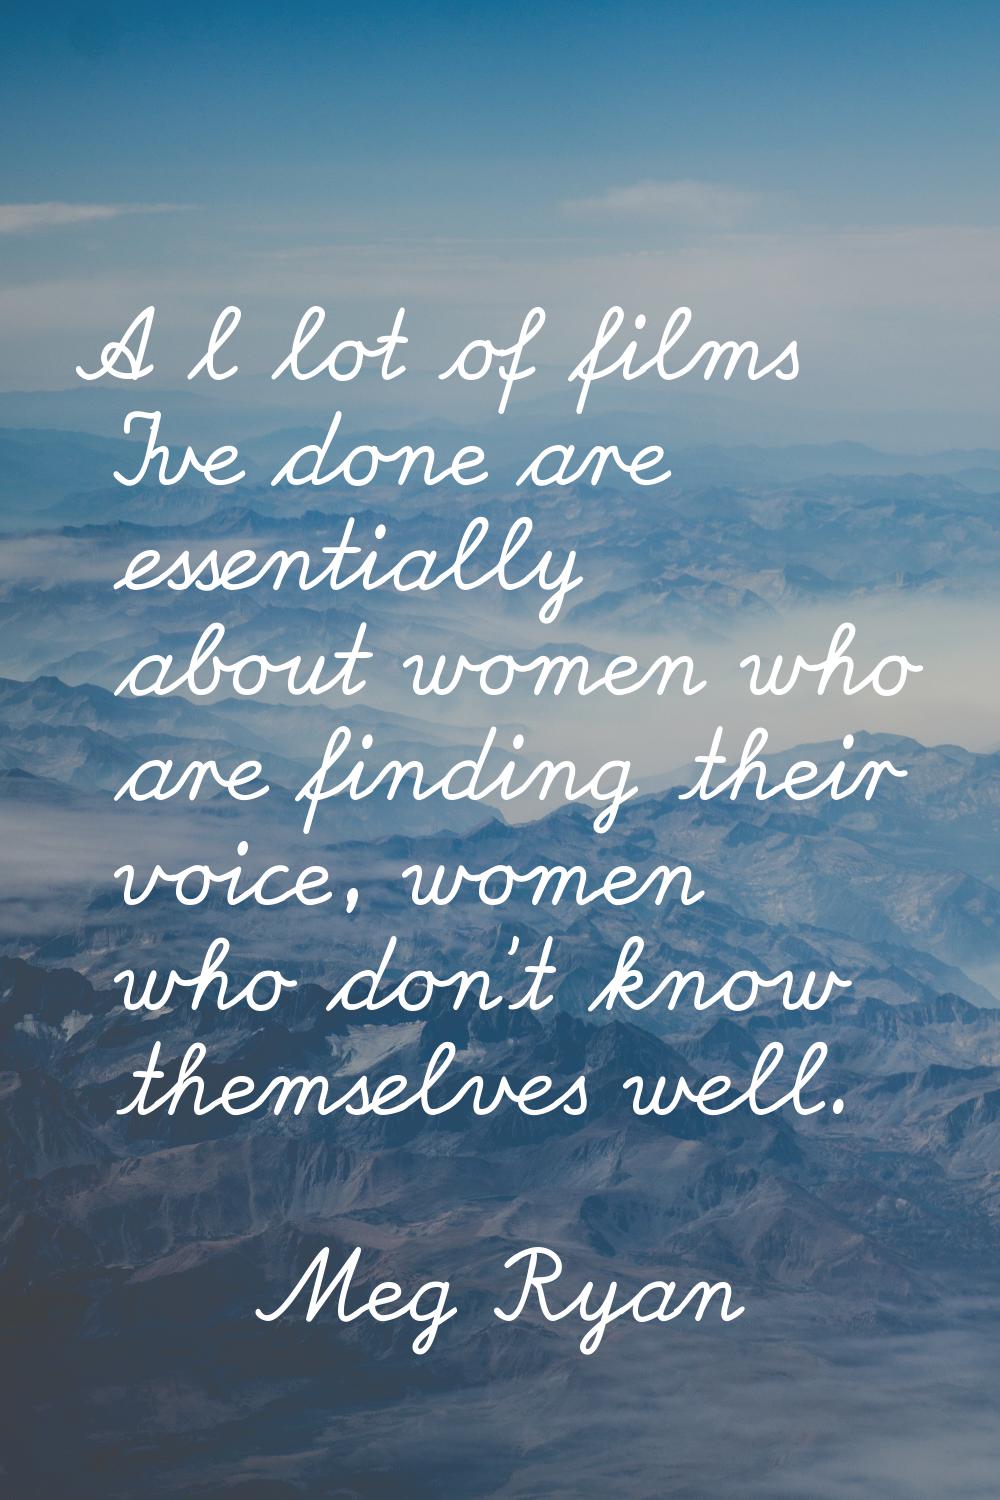 A l lot of films I've done are essentially about women who are finding their voice, women who don't